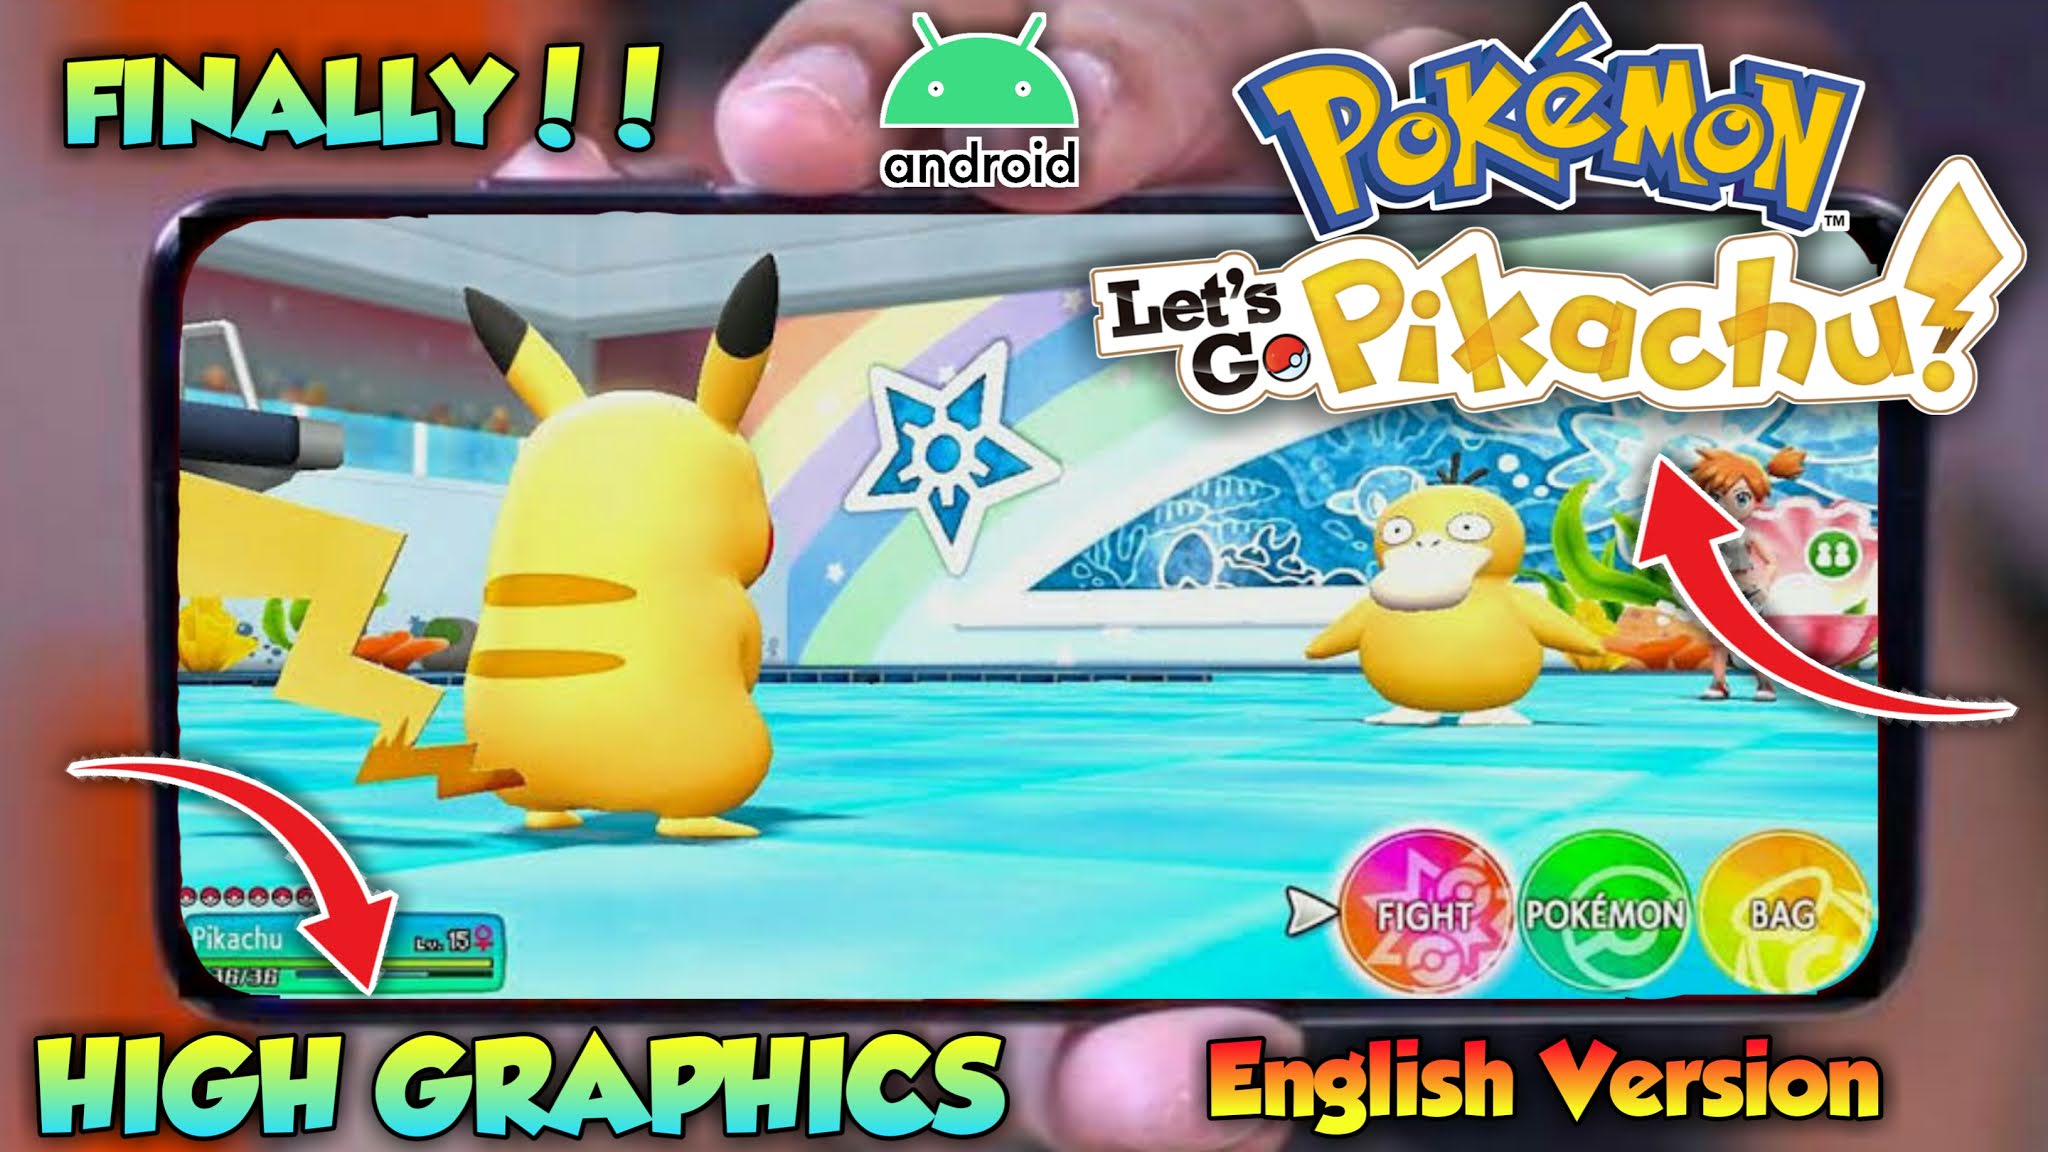 543mb Download Pokemon Let S Go Pikachu Fully High Graphics For Android English Version 21